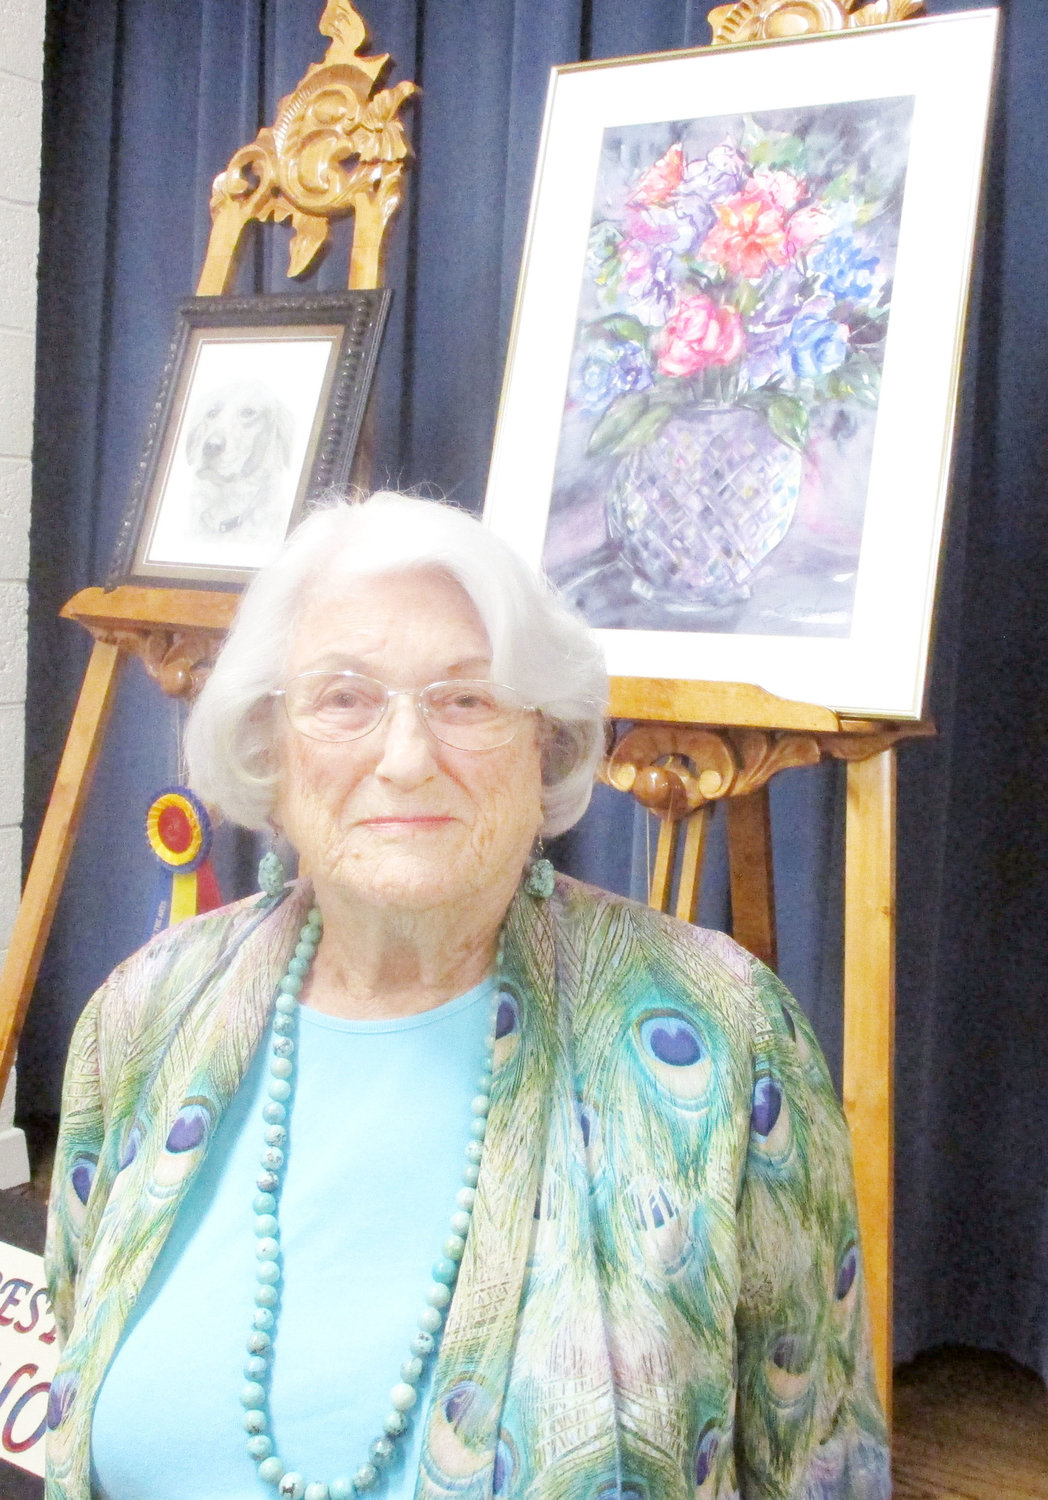 Best of Professional was won by Dodie Singler, Lindale, with “Chihuly Take Off,” watercolor.